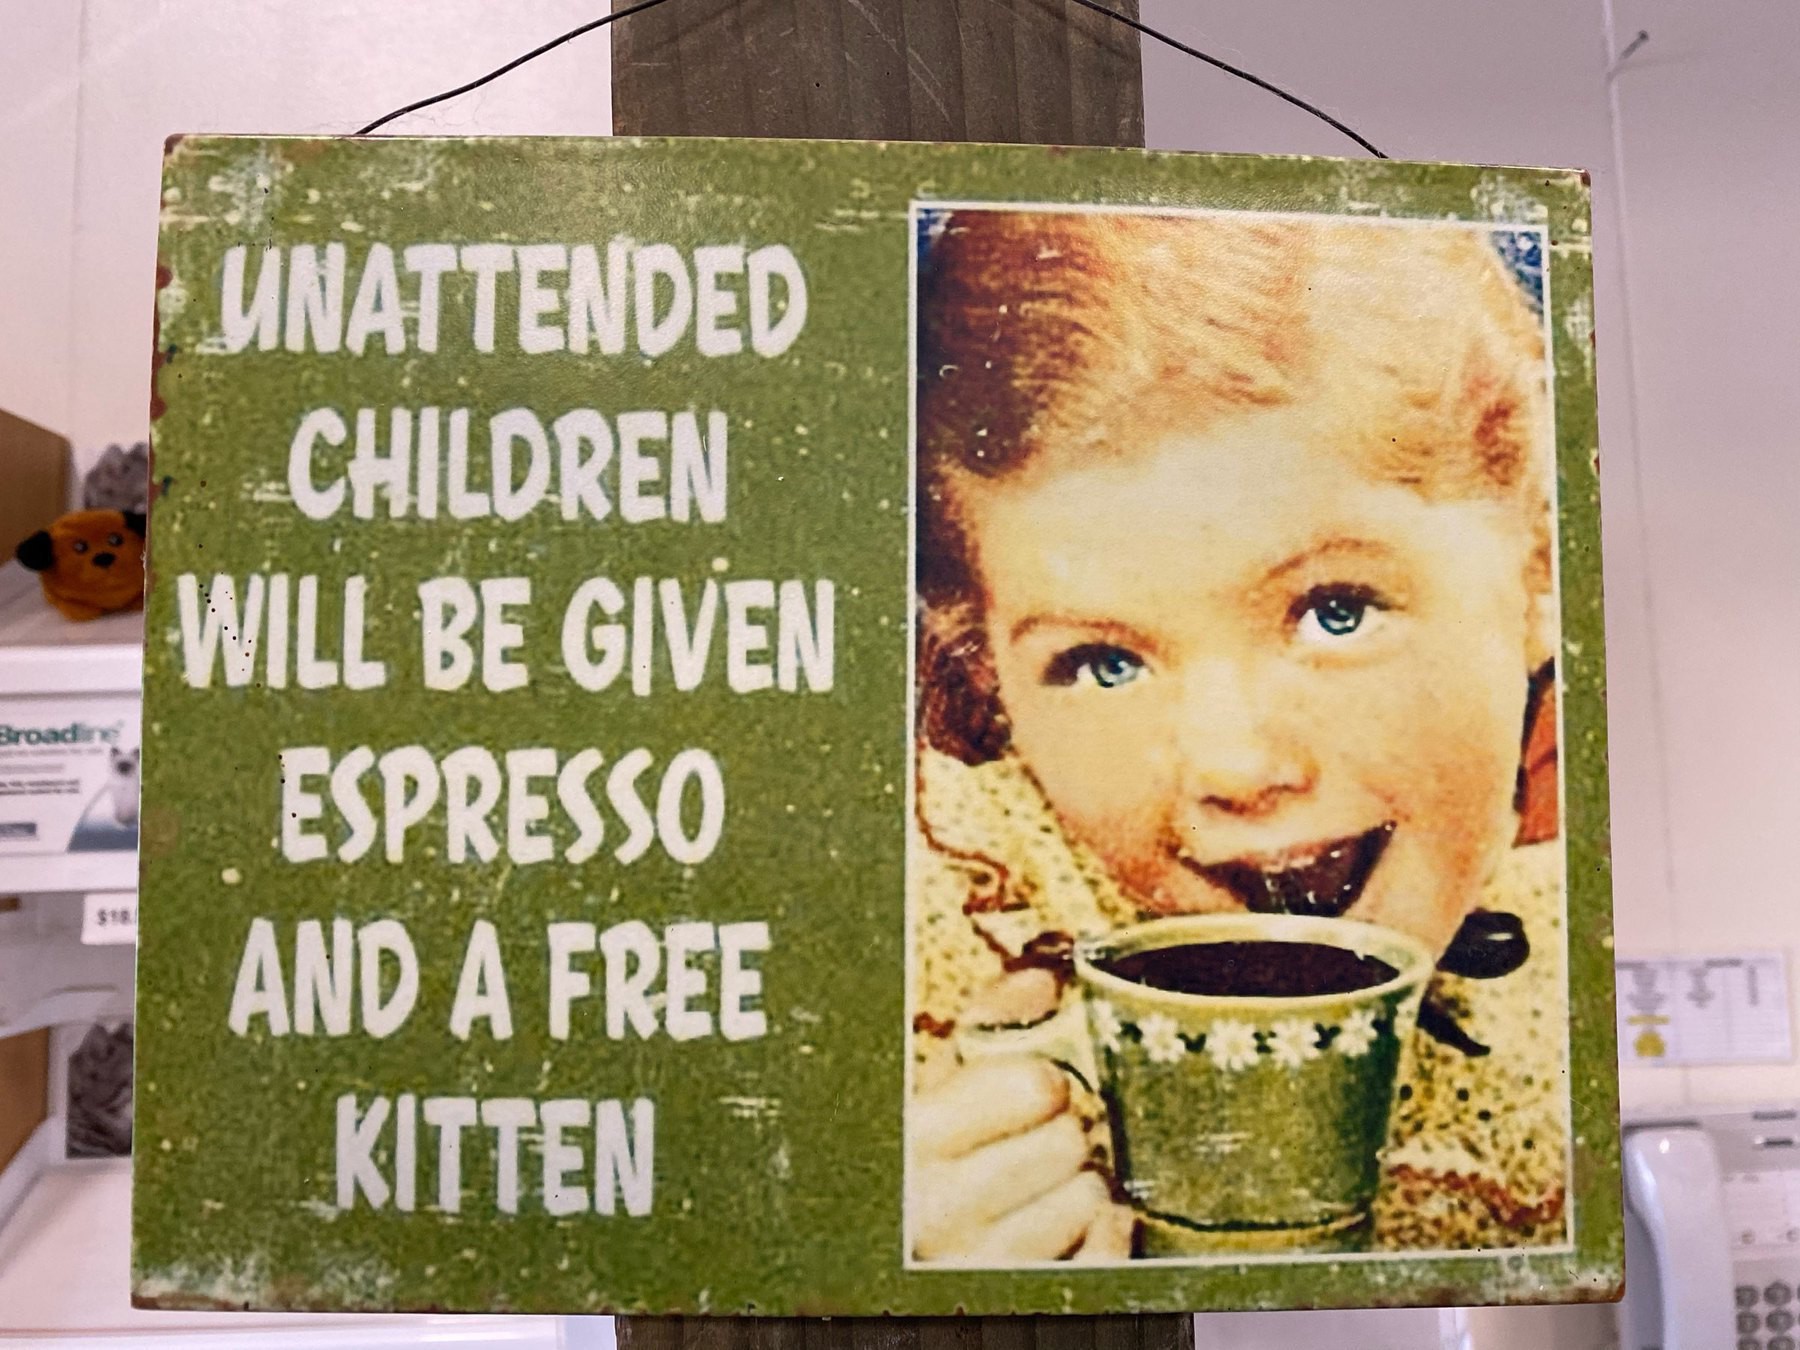 Unattended children will ve given espresso and a free kitten. 